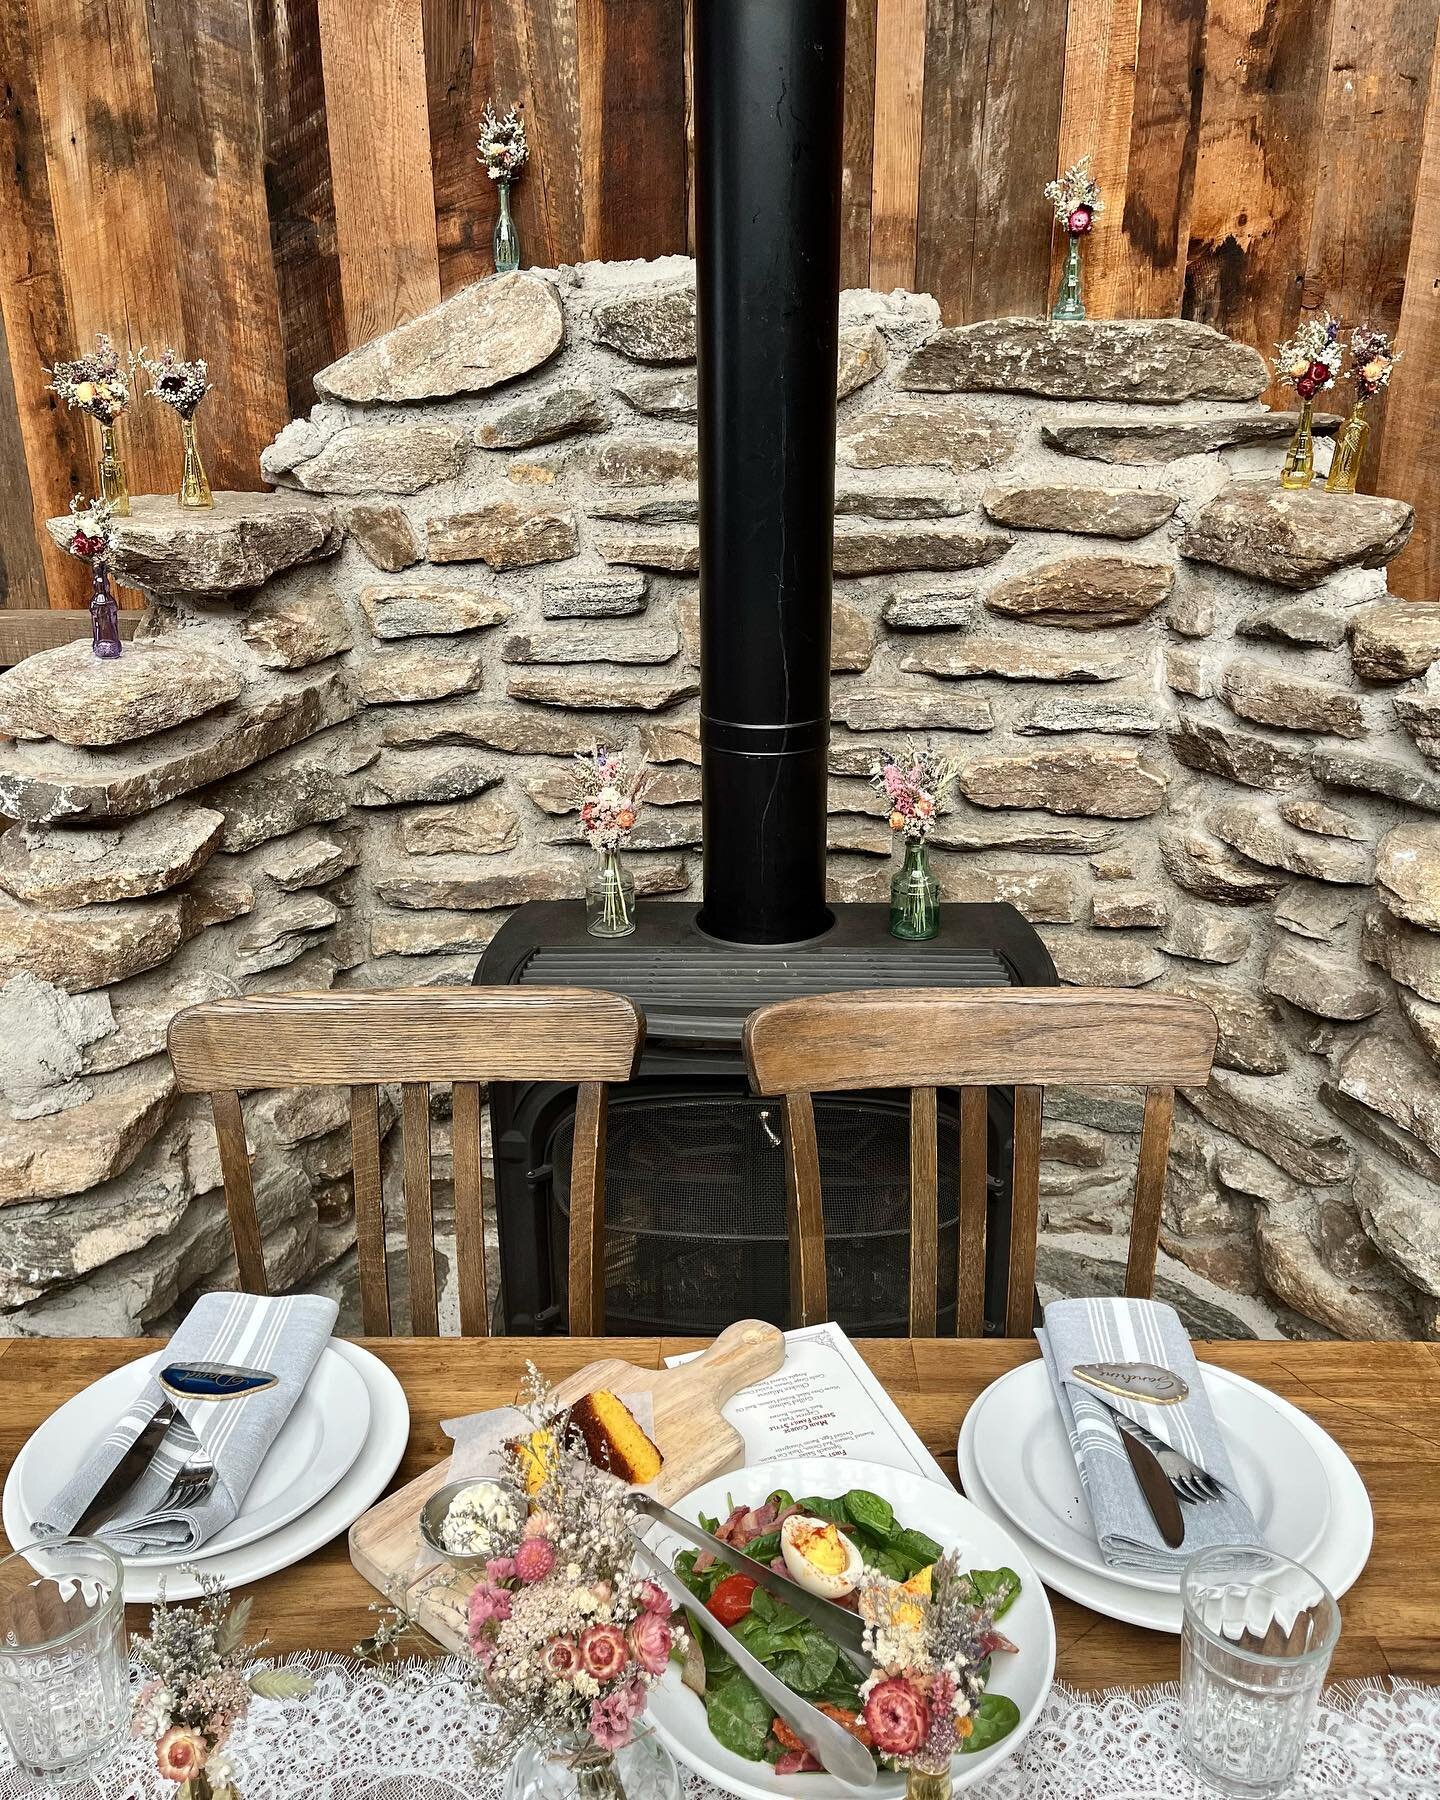 Table for 2 🤍
.
Contact Melissa for more information on booking your intimate wedding celebration with us at m.ortez@skoposhospitality.com
.
.
.
#microwedding #thebarn #sweetheartable #familystyle #privateevents